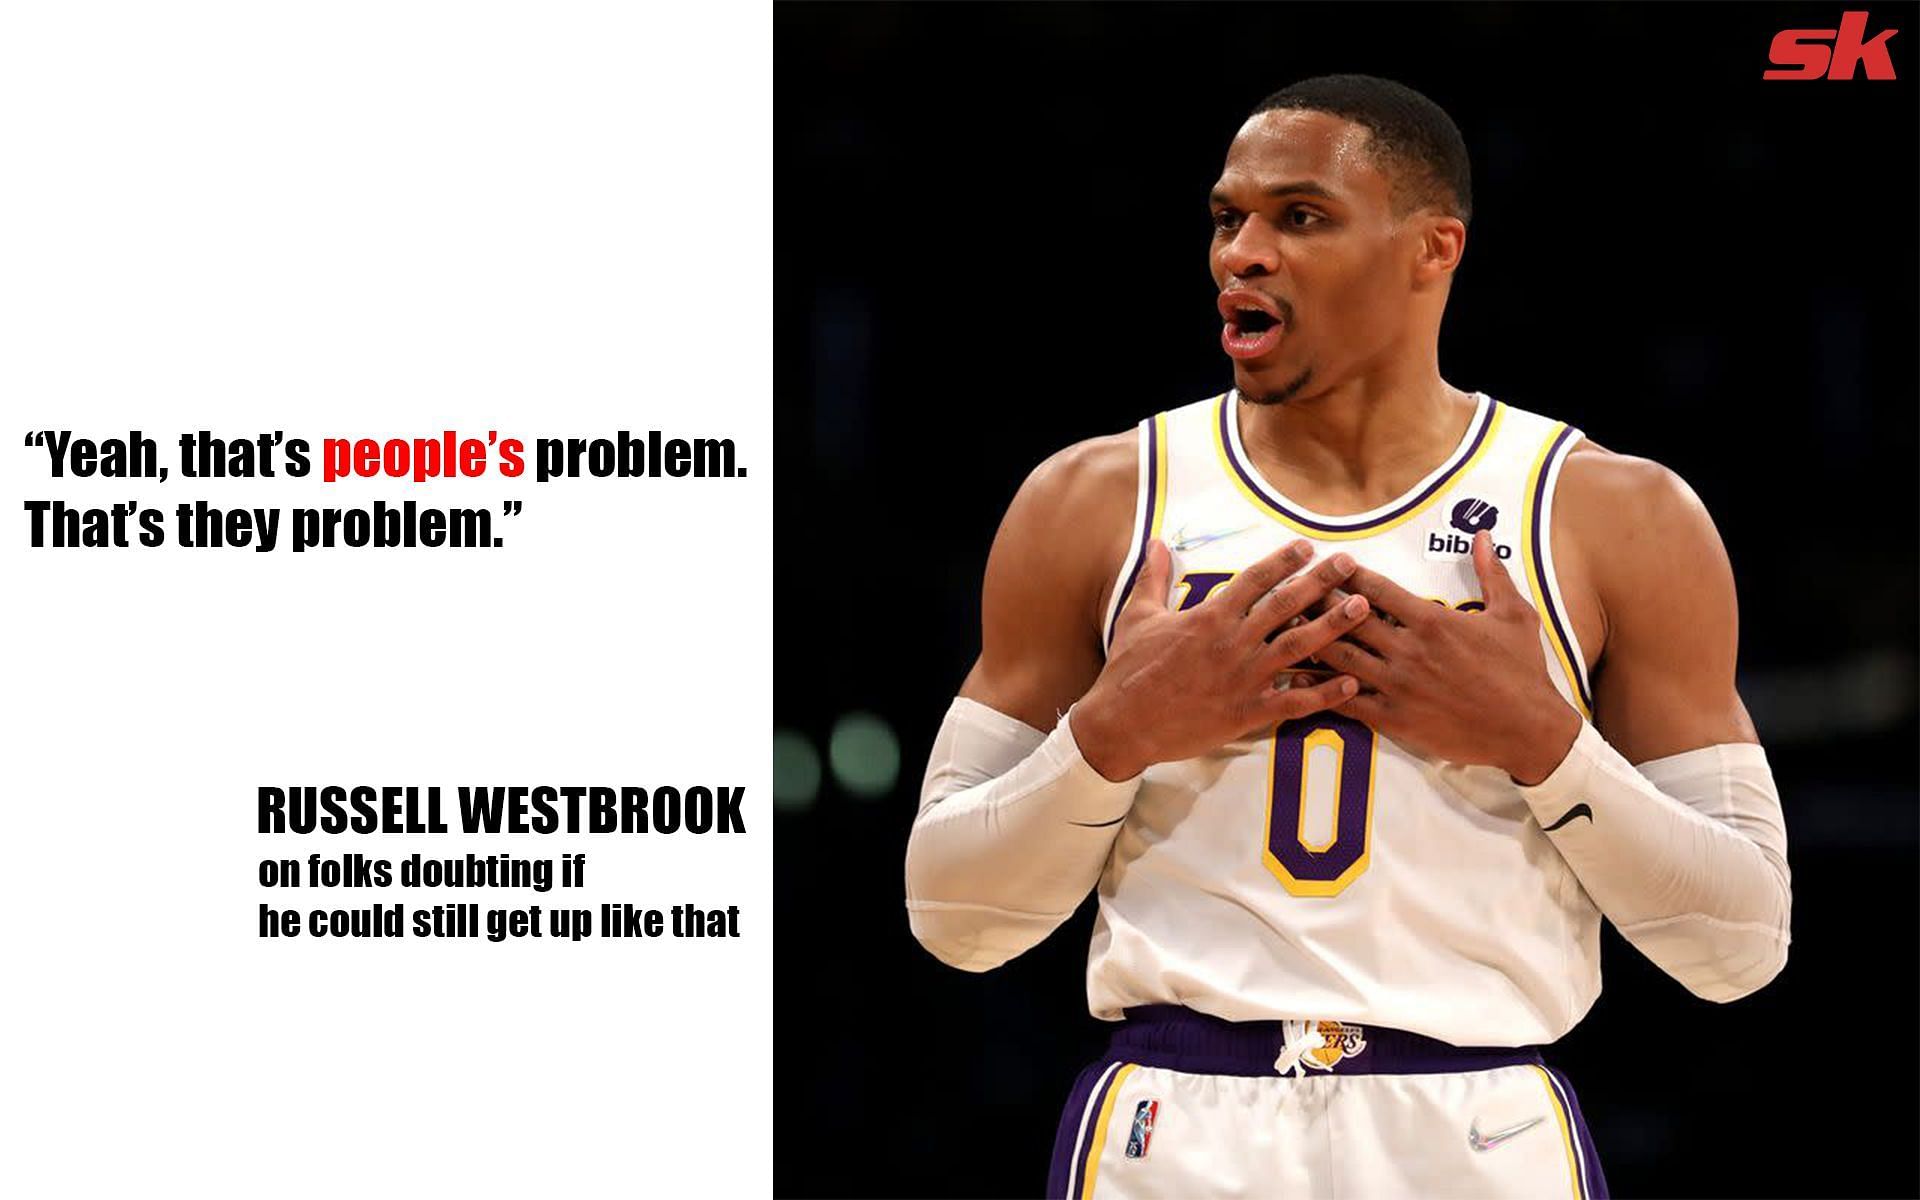 Russell Westbrook of the LA Lakers on people doubting his ability to get up.